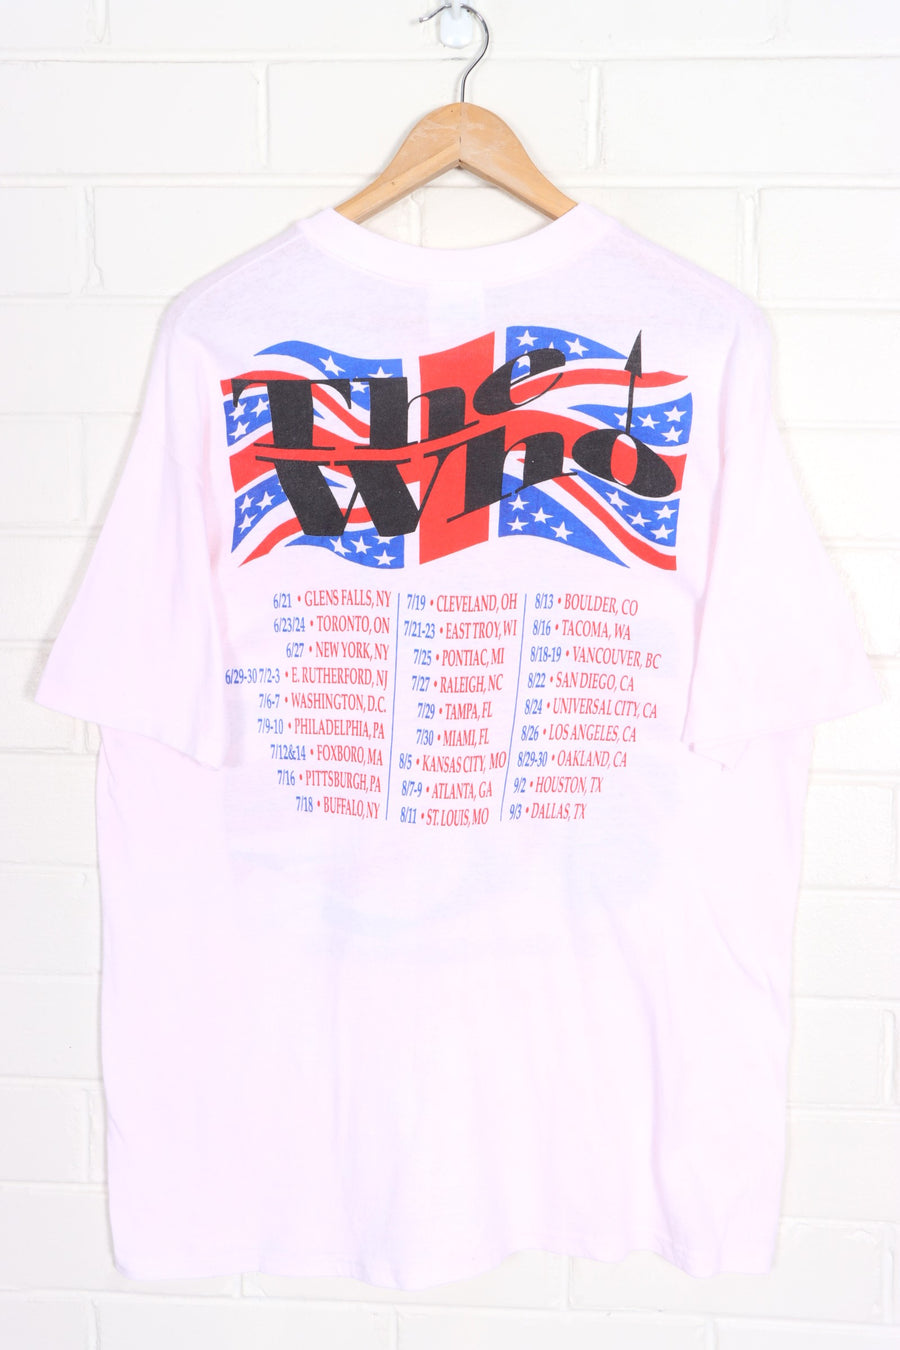 The Who 1989 'The Kids Are Alright' Tour Single Stitch Tee USA Made (L)